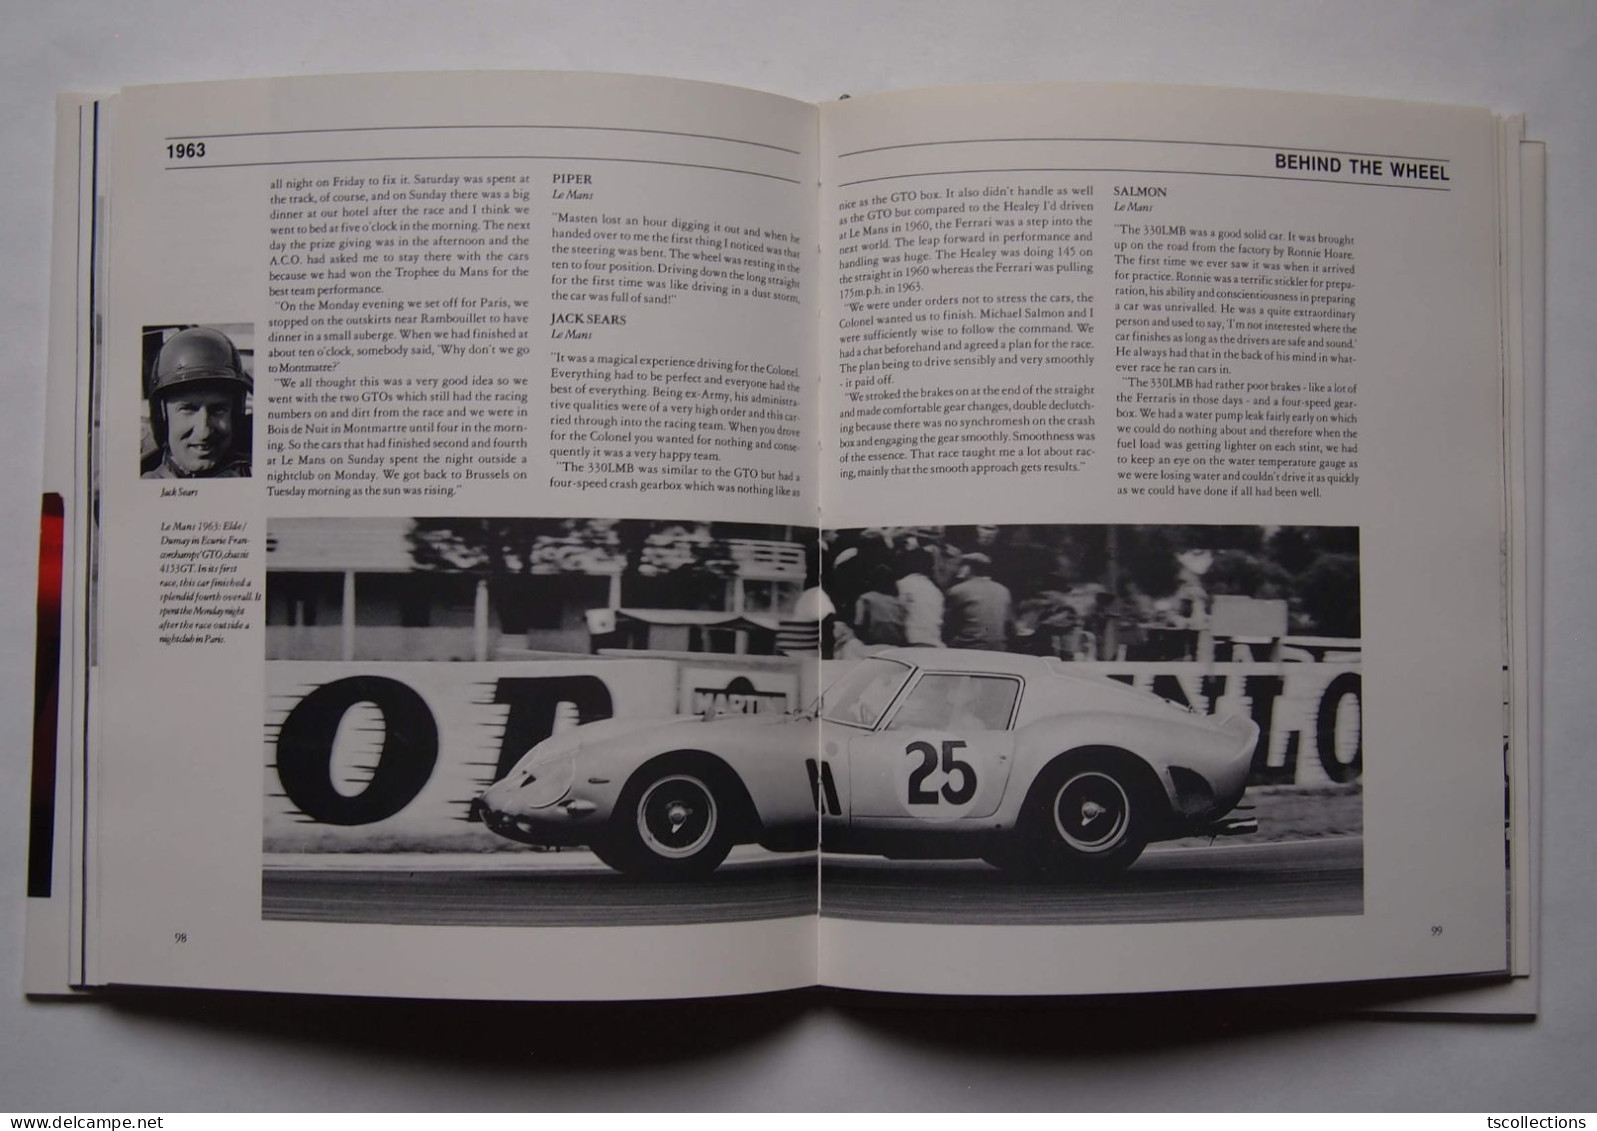 Ferrari Gto The Classic Experience - Books On Collecting